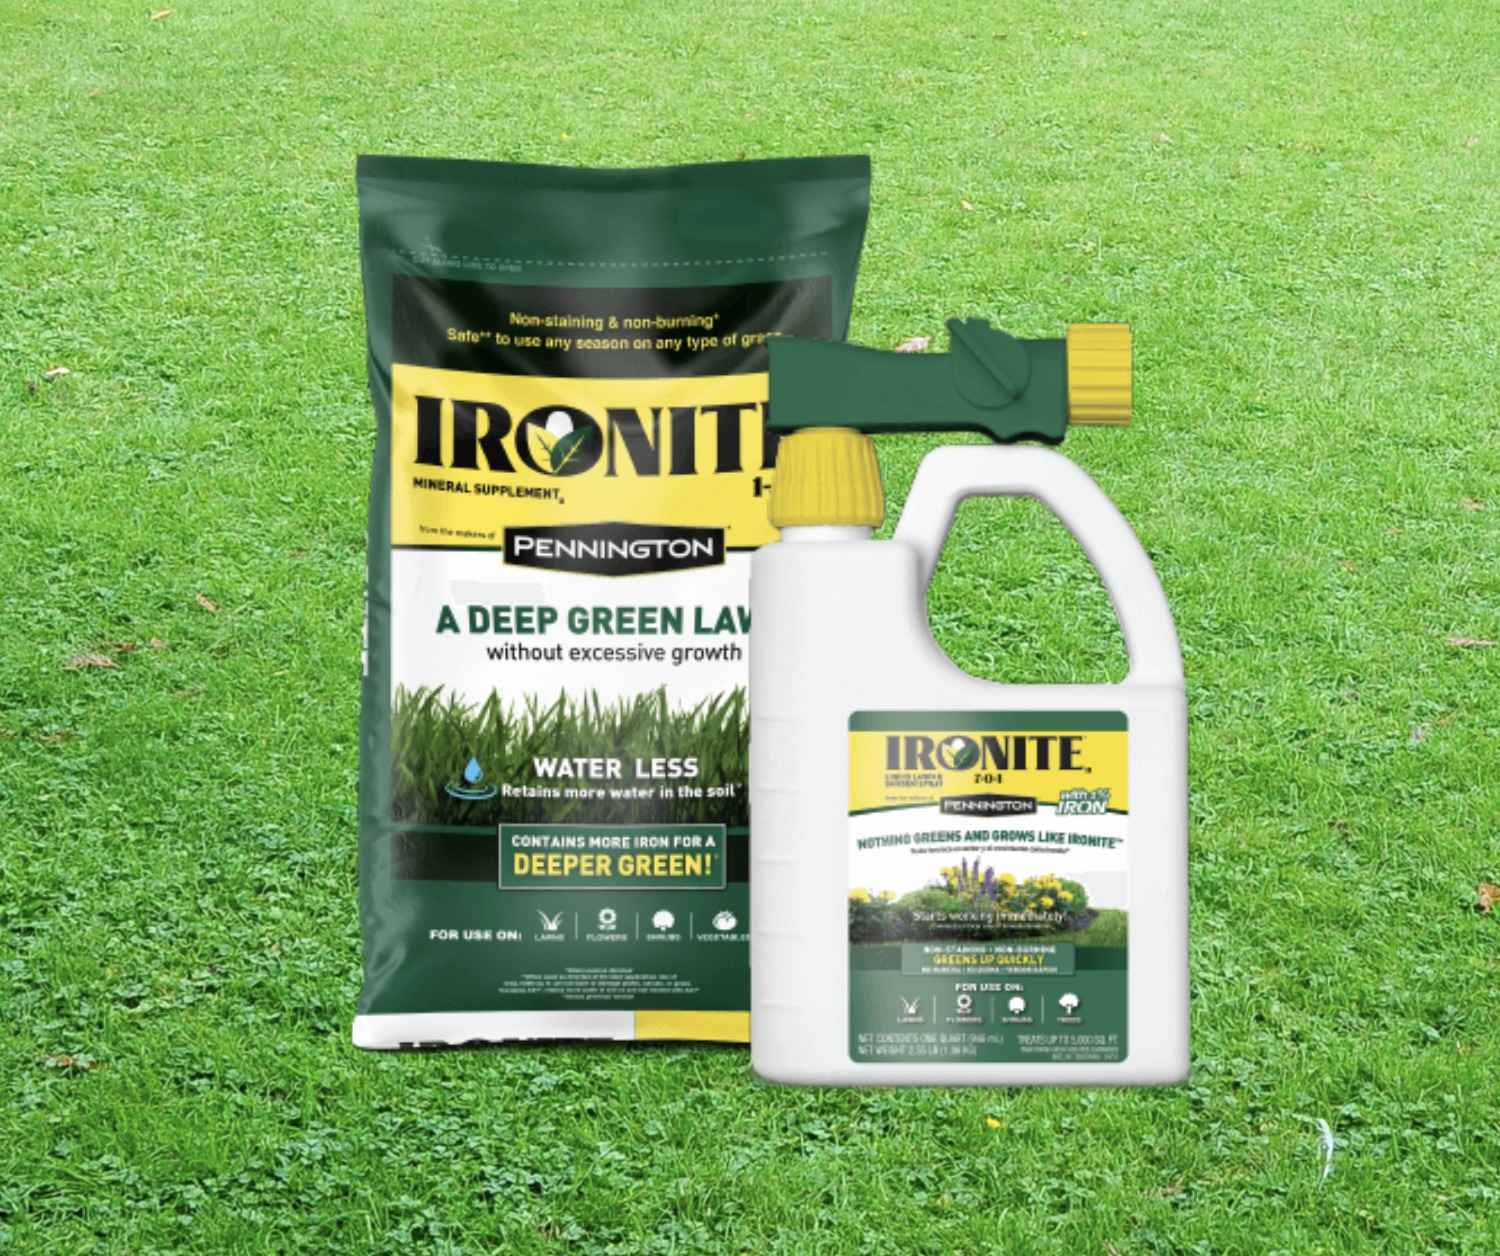 How Long Does It Take For Ironite To Green Grass